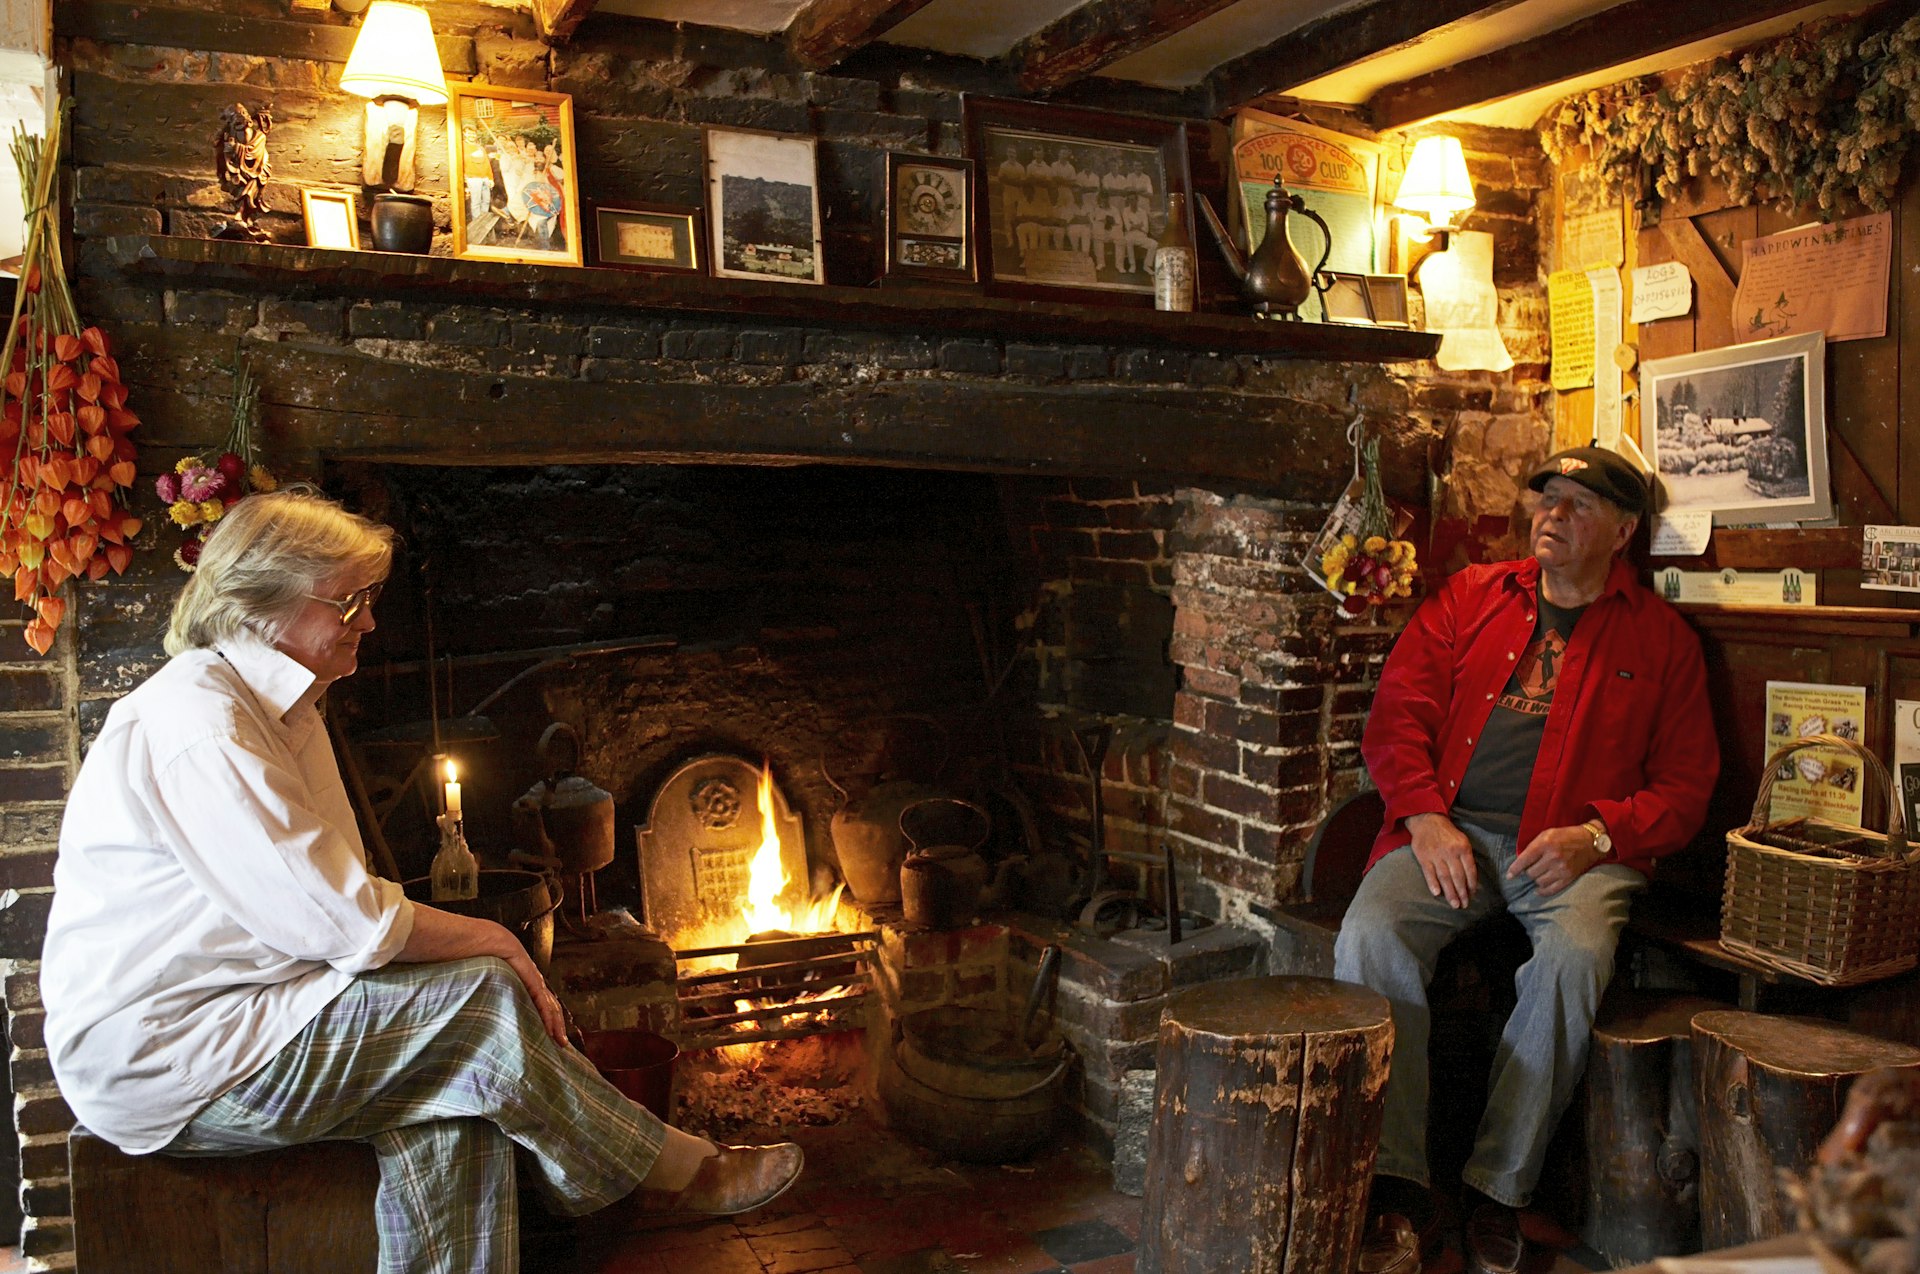 A couple warming up by the fire at an English pub